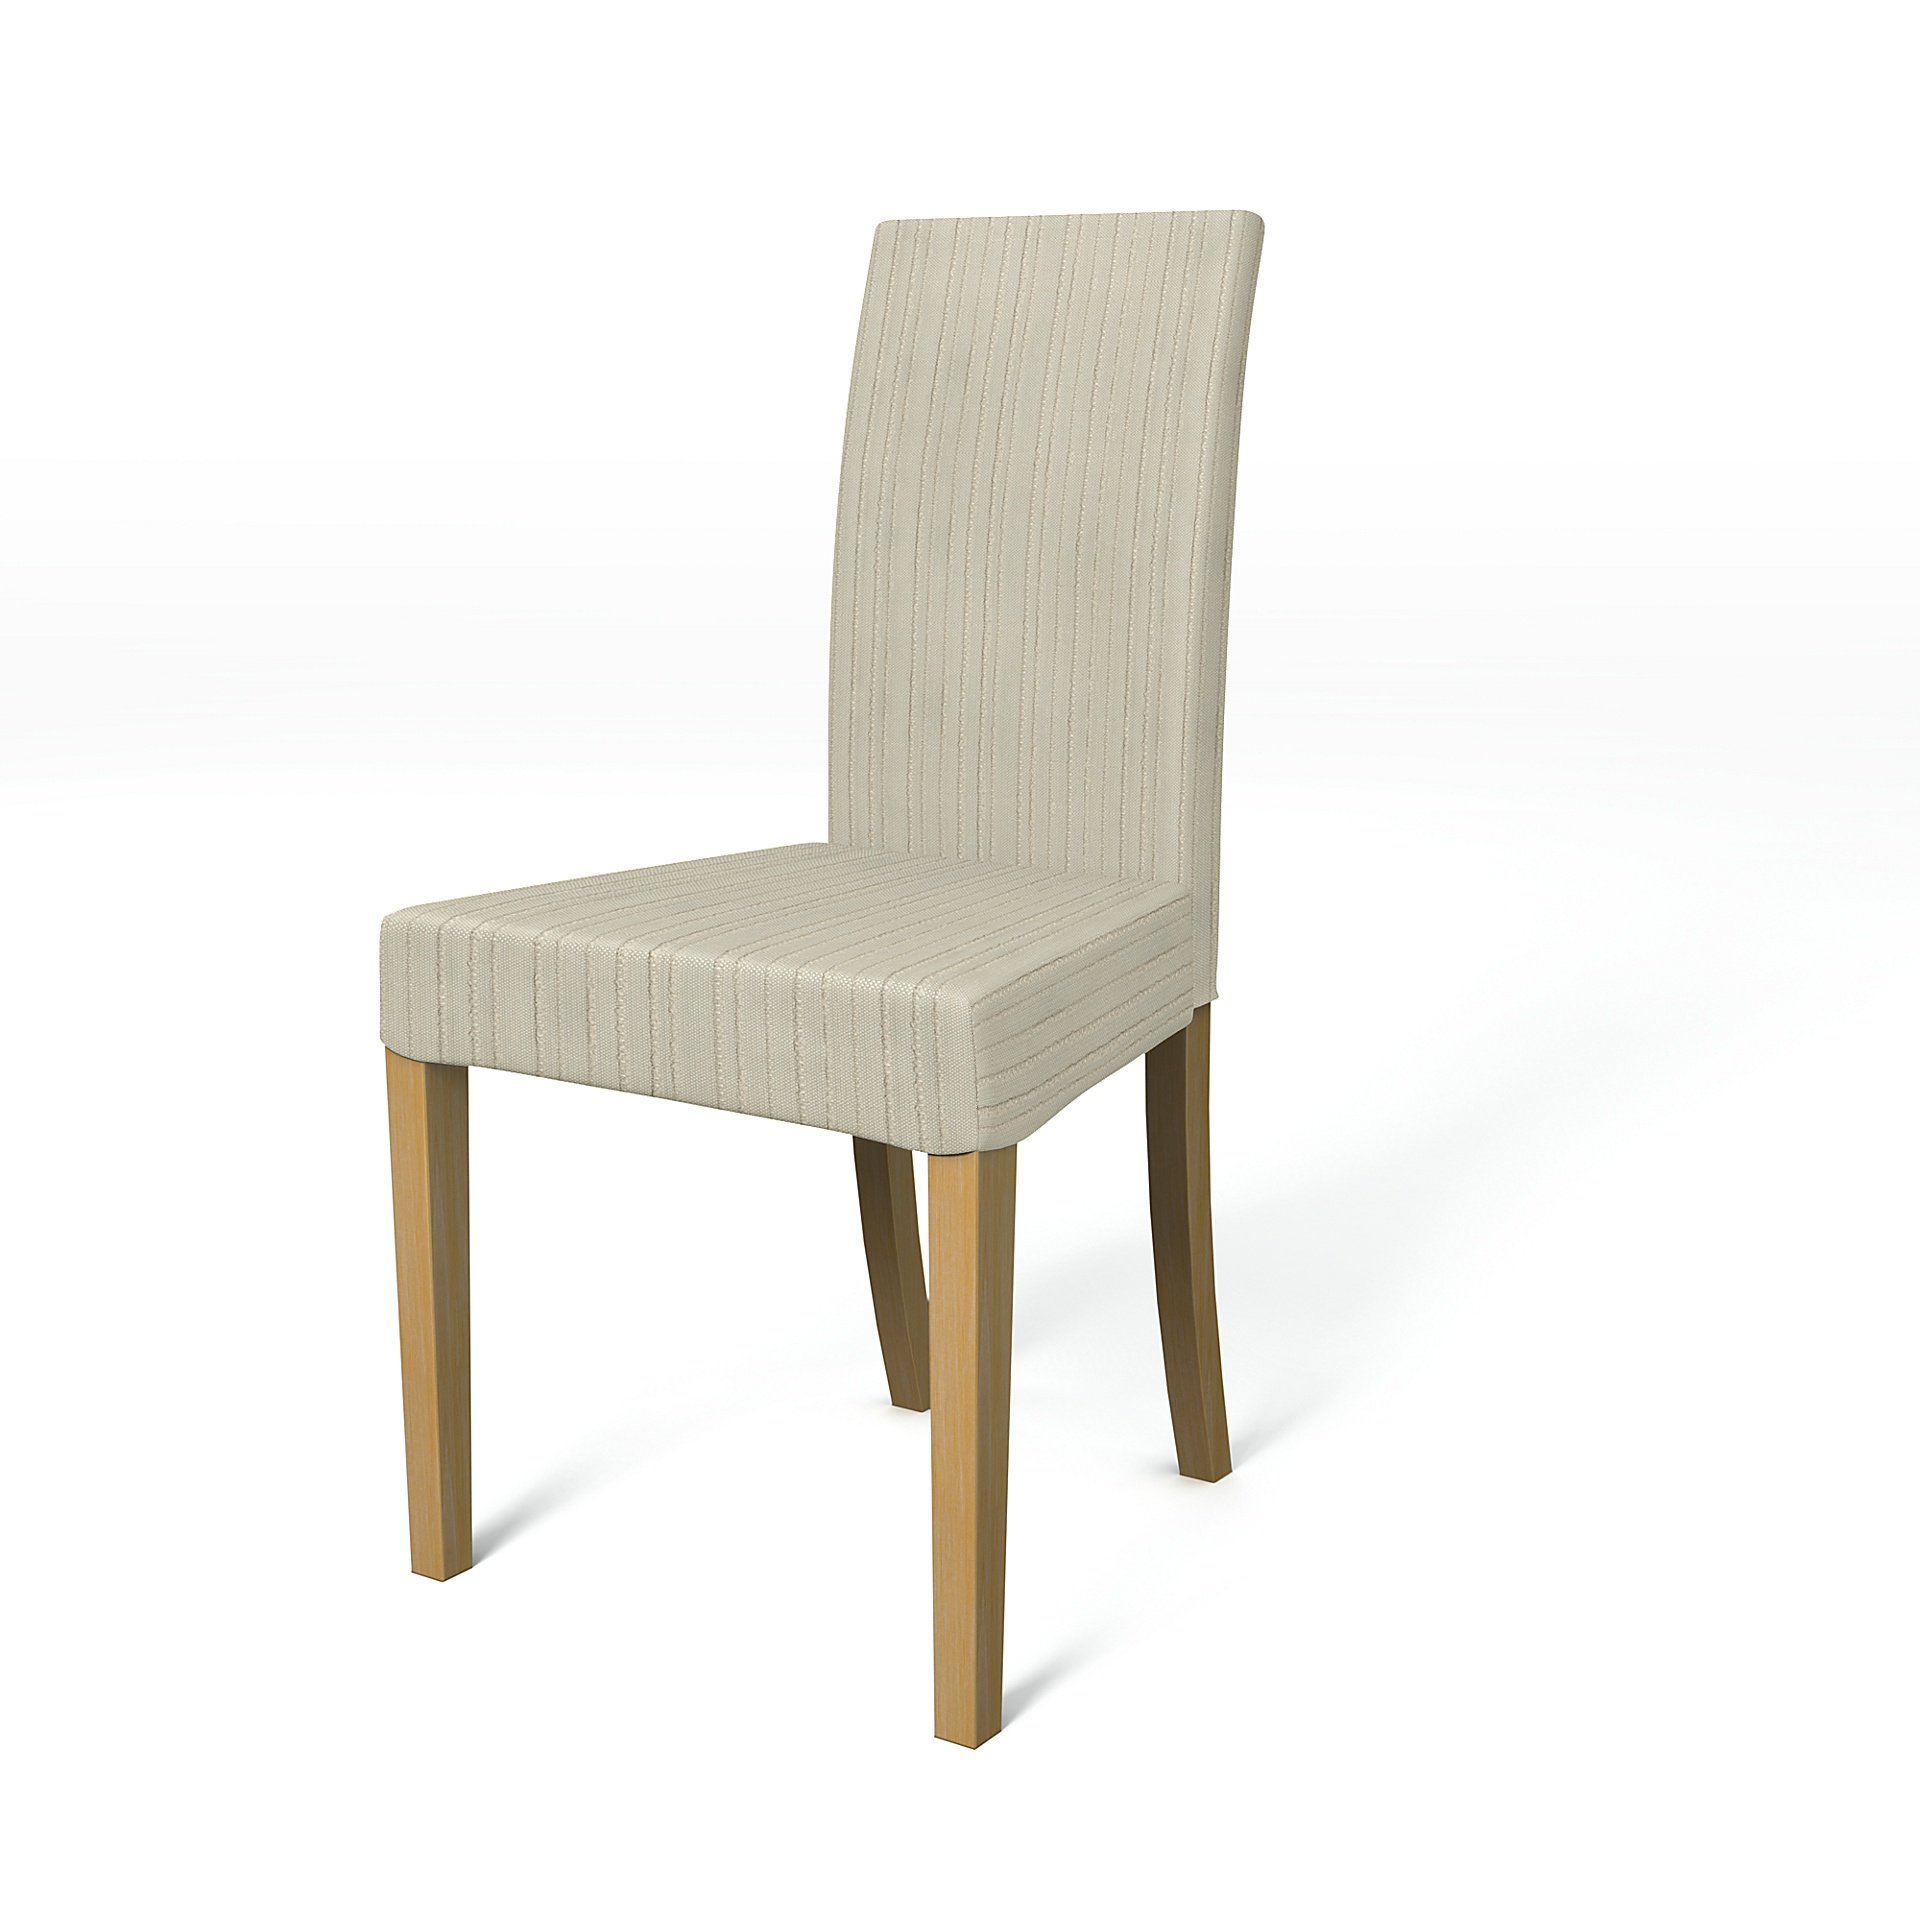 IKEA - Harry Dining Chair Cover, Sand Beige, Outdoor - Bemz